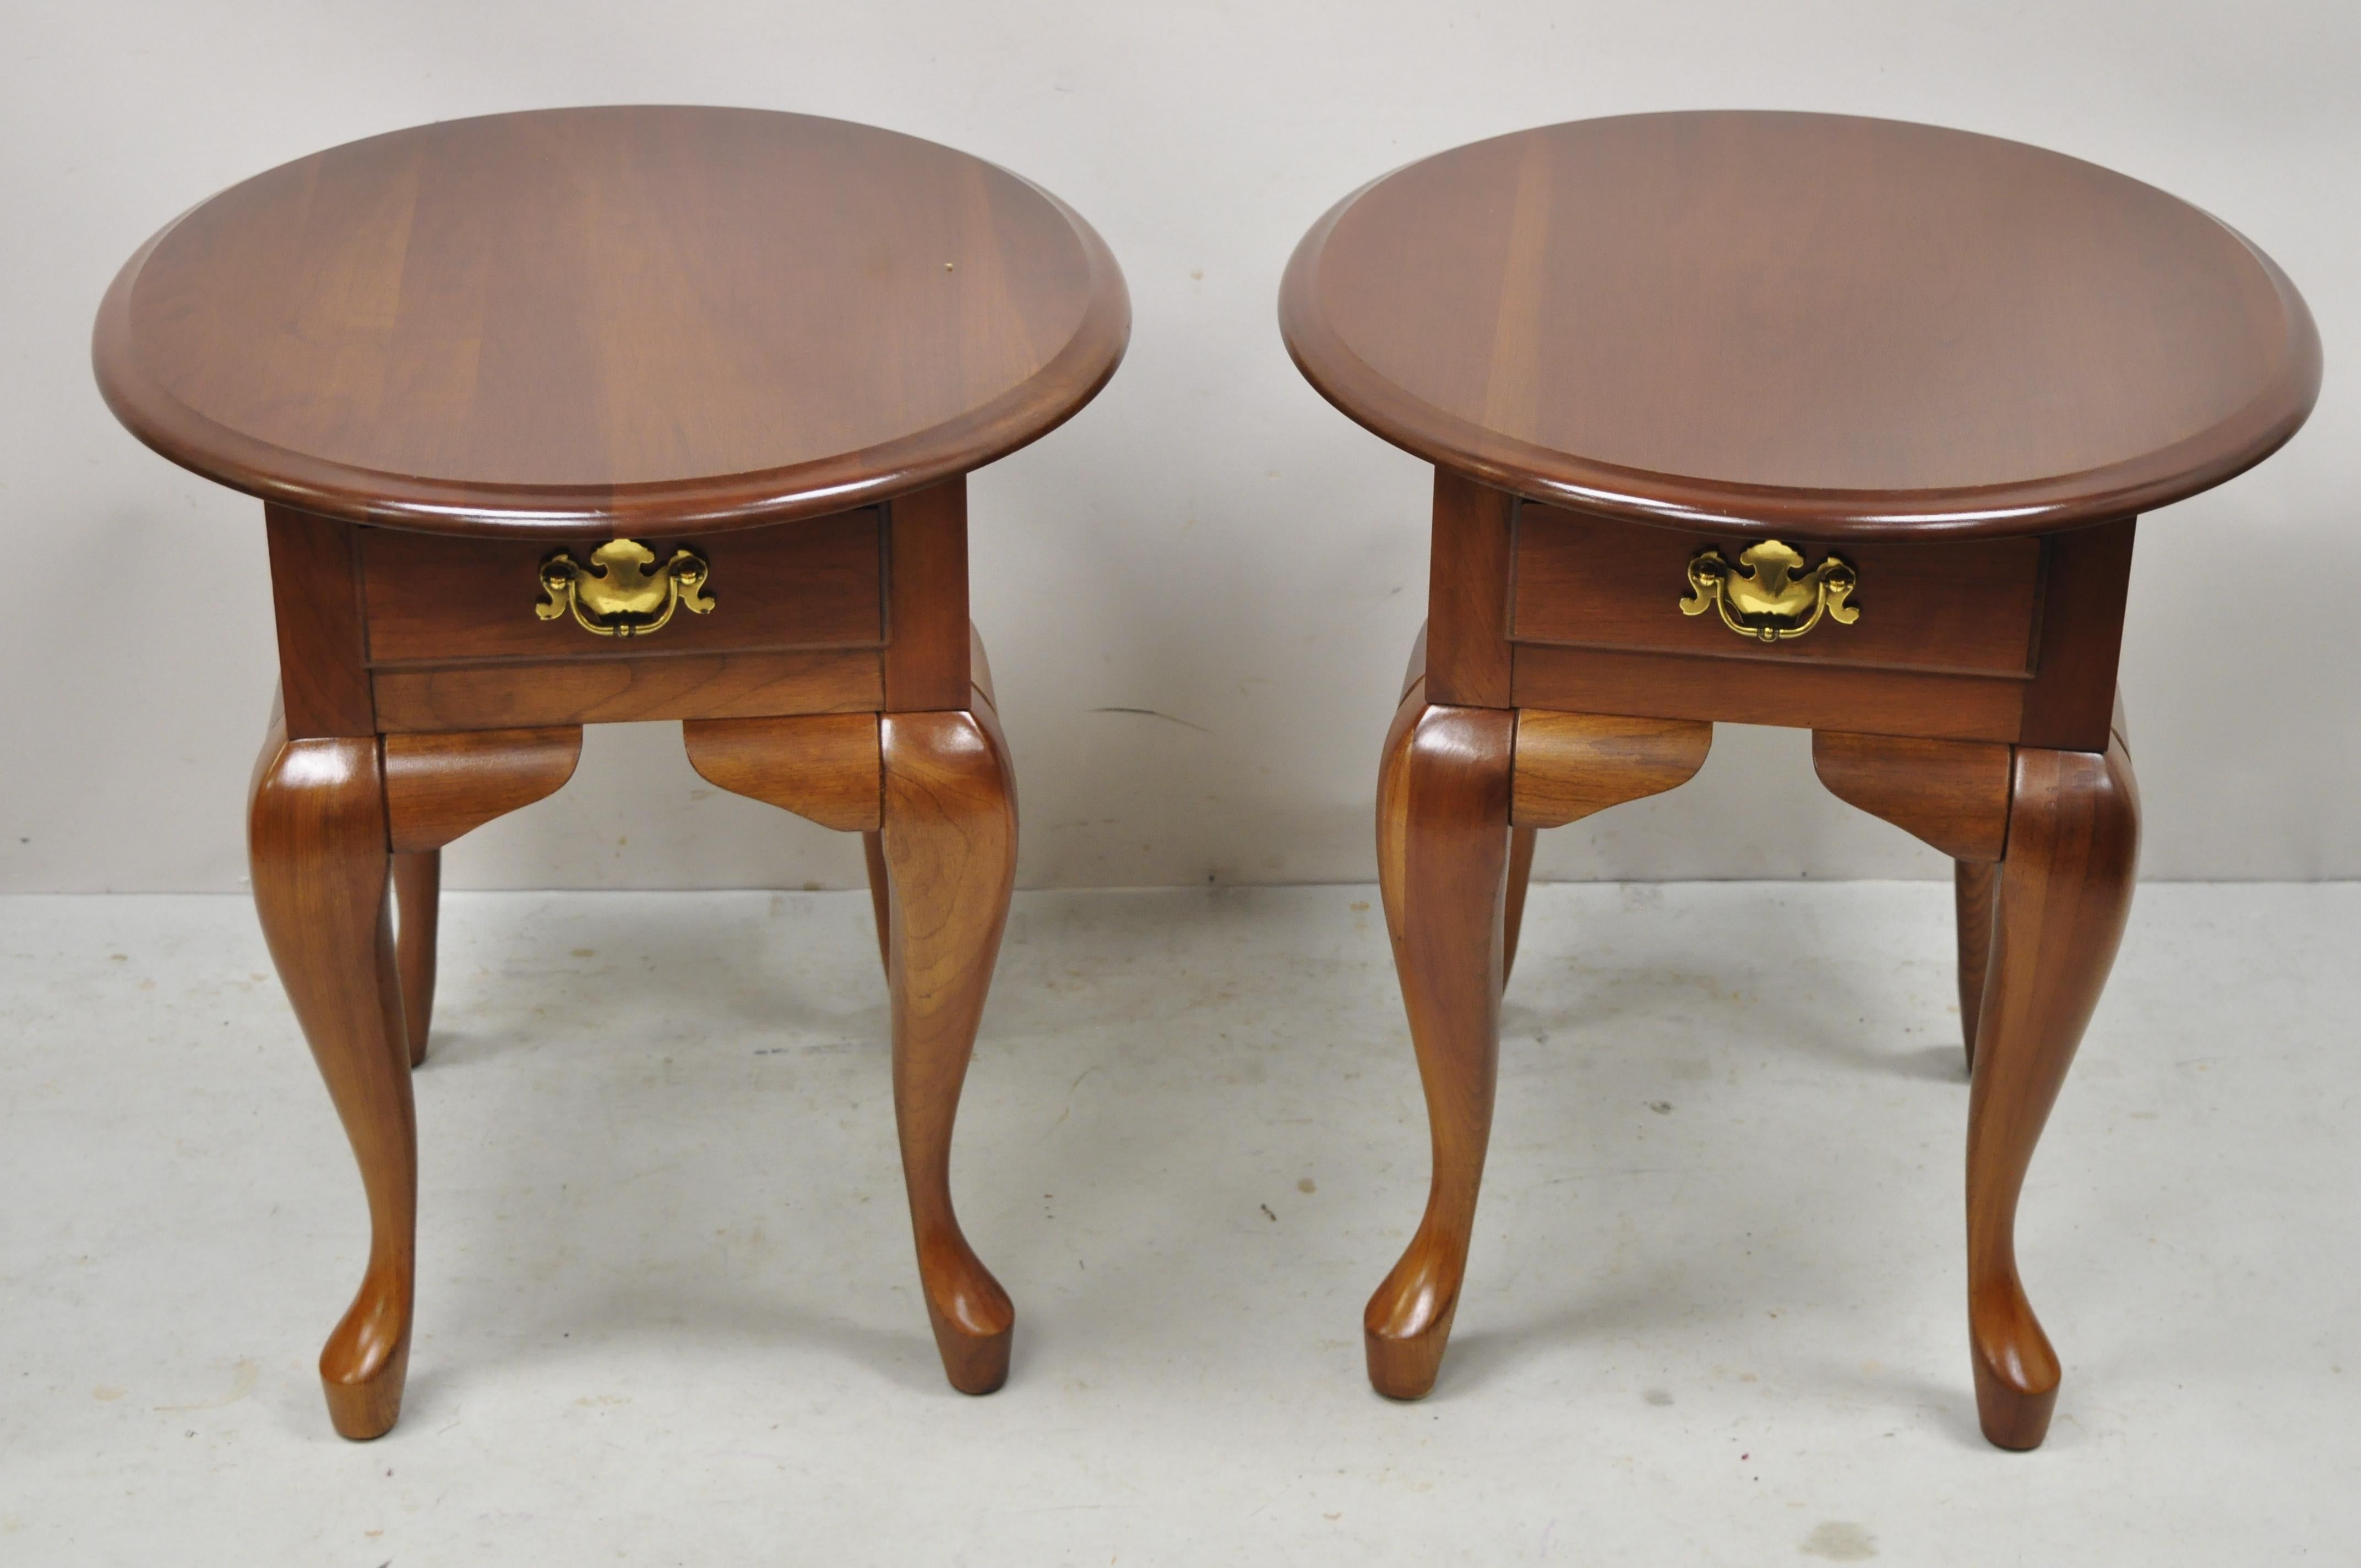 Cherry wood Queen Anne one drawer oval lamp side end tables - a pair. Item features oval top, solid cherry wood construction, beautiful wood grain, 1 dovetailed drawer, shapely Queen Anne legs, solid brass hardware, quality American craftsmanship.